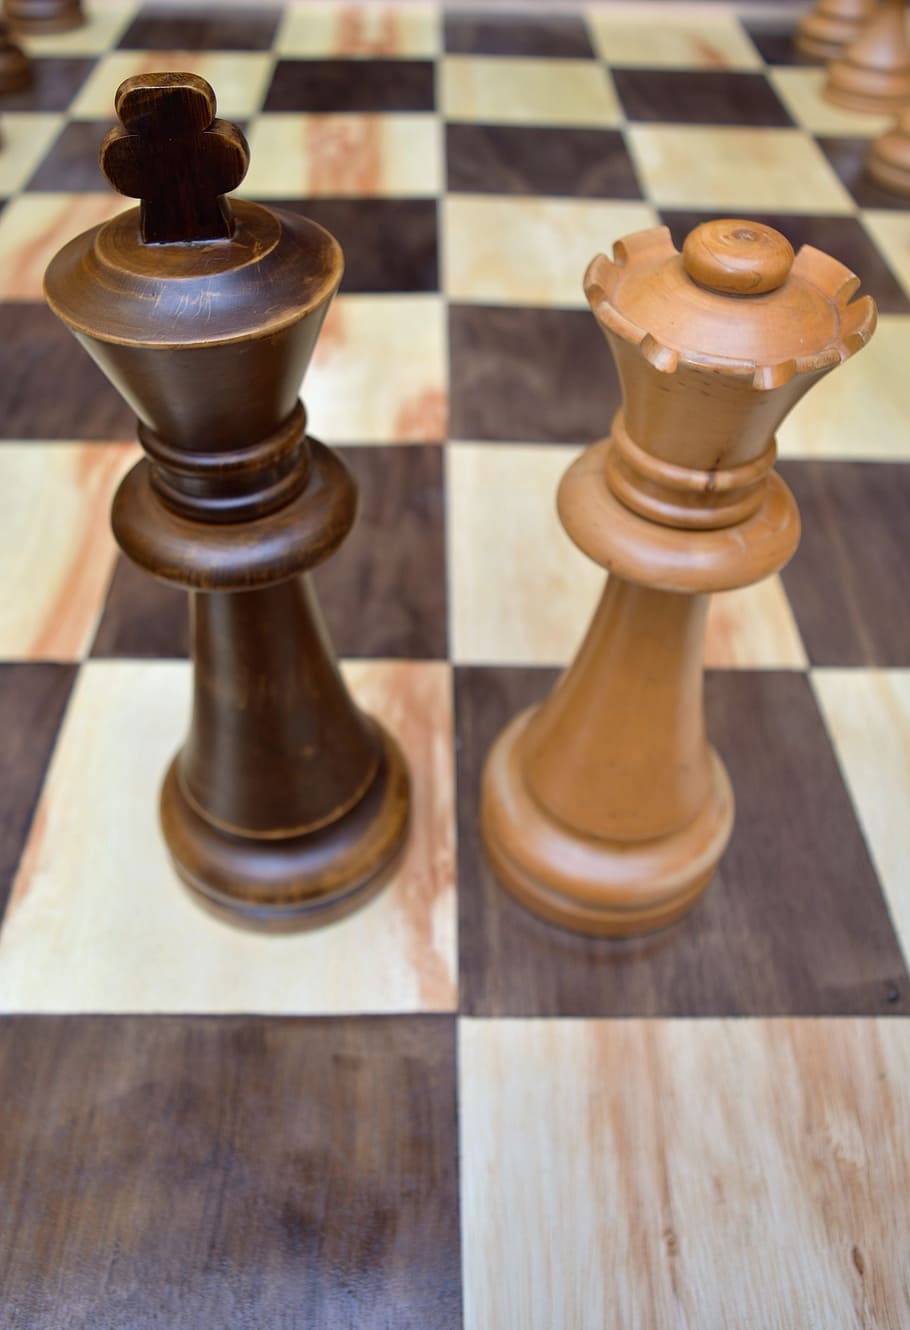 Games, Chess, king, strategy, wood - Material, chess Board, leisure Games, sport, competition, success